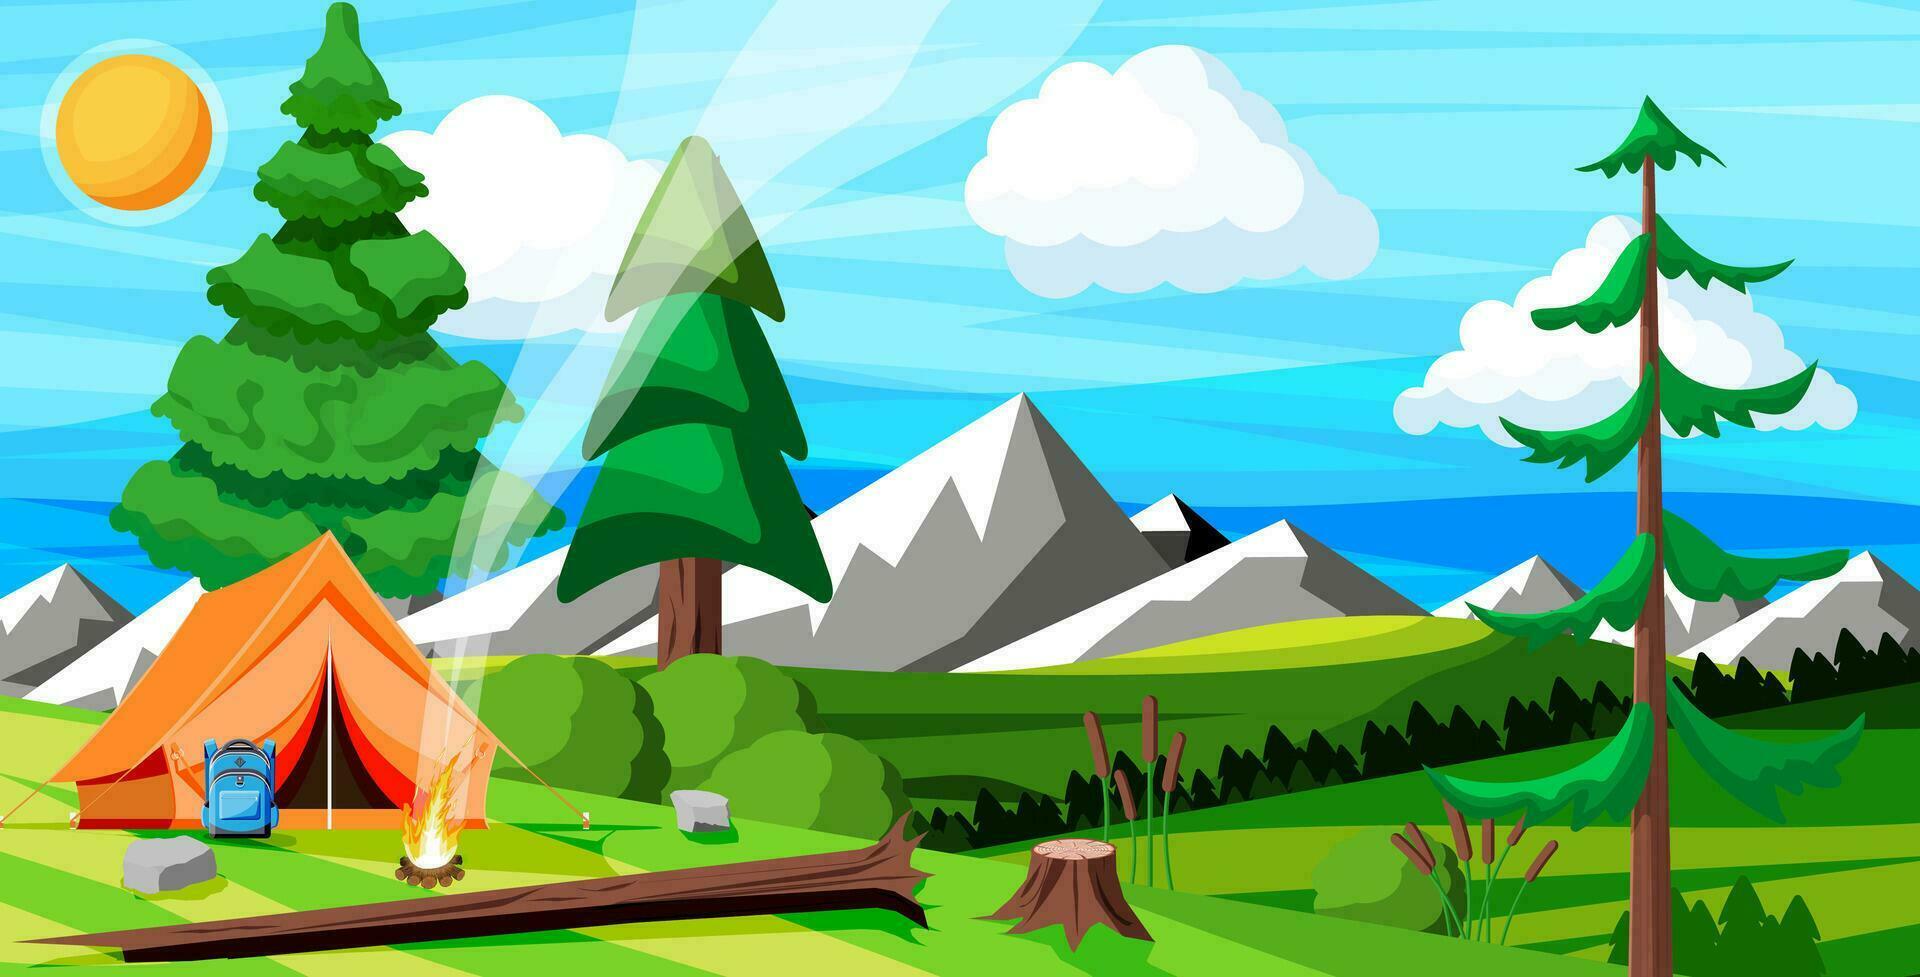 Meadow with Grass and Camping. Tents and Campfire. Summer Landscape Concept. Green Forest and Blue Sky. Countryside Rolling Hills and Mountains. Trees on the Horizon. Flat Vector Illustration